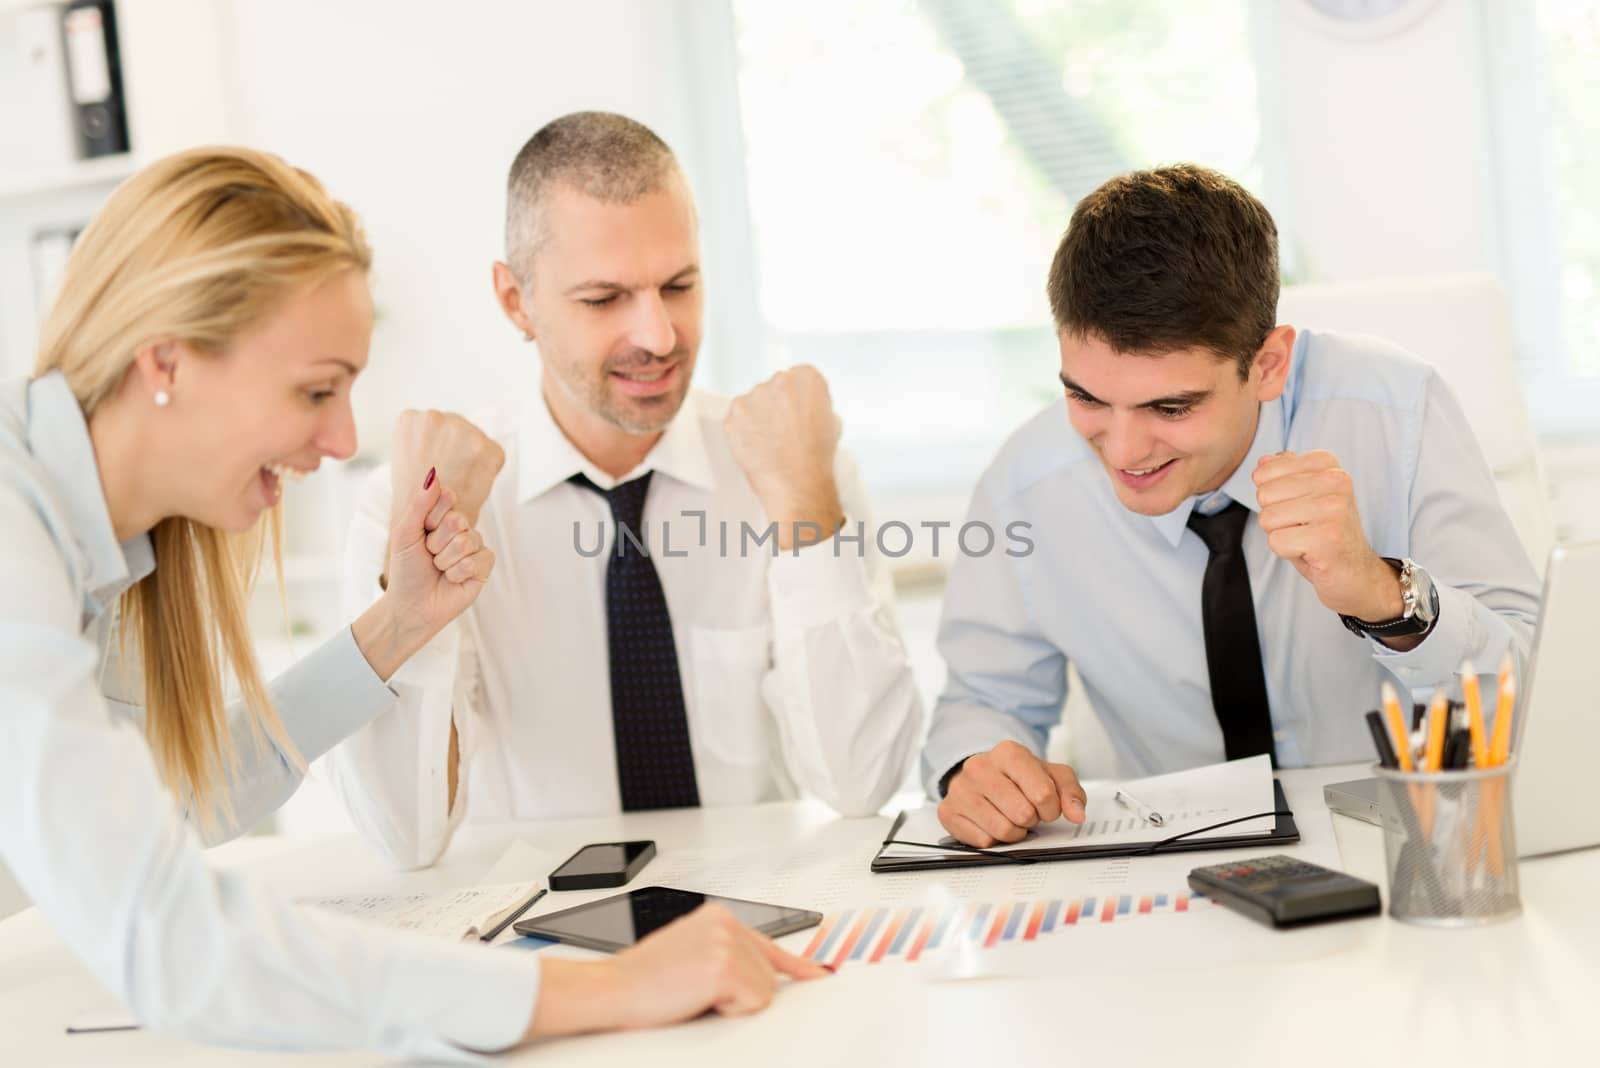 Successful young business people having a meeting in the office. Three business people looking at document and discussing, with raised arms celebrating success.